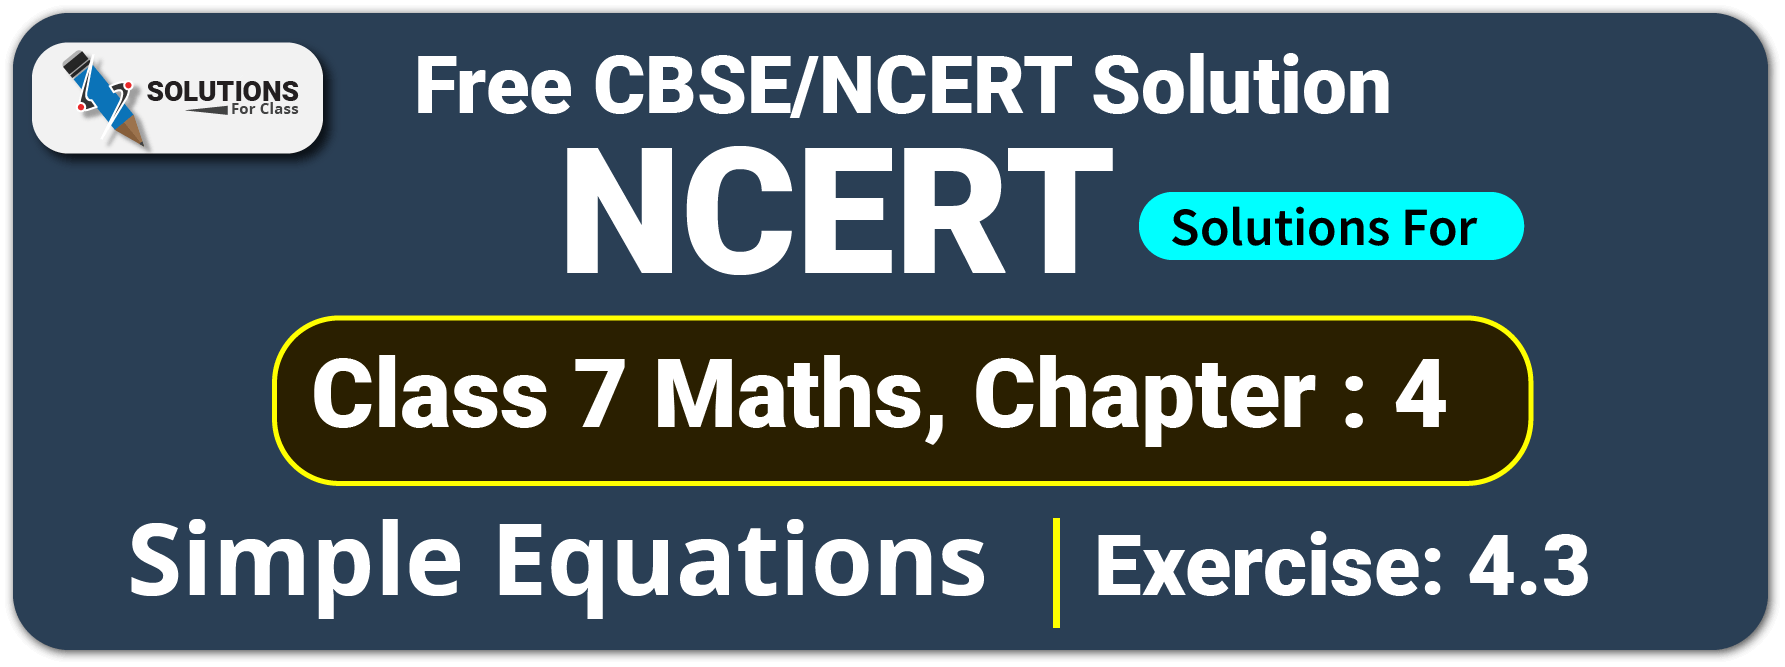 NCERT Solutions For Class 7 Maths Chapter 4, Simple Equations, Exercise 4.3